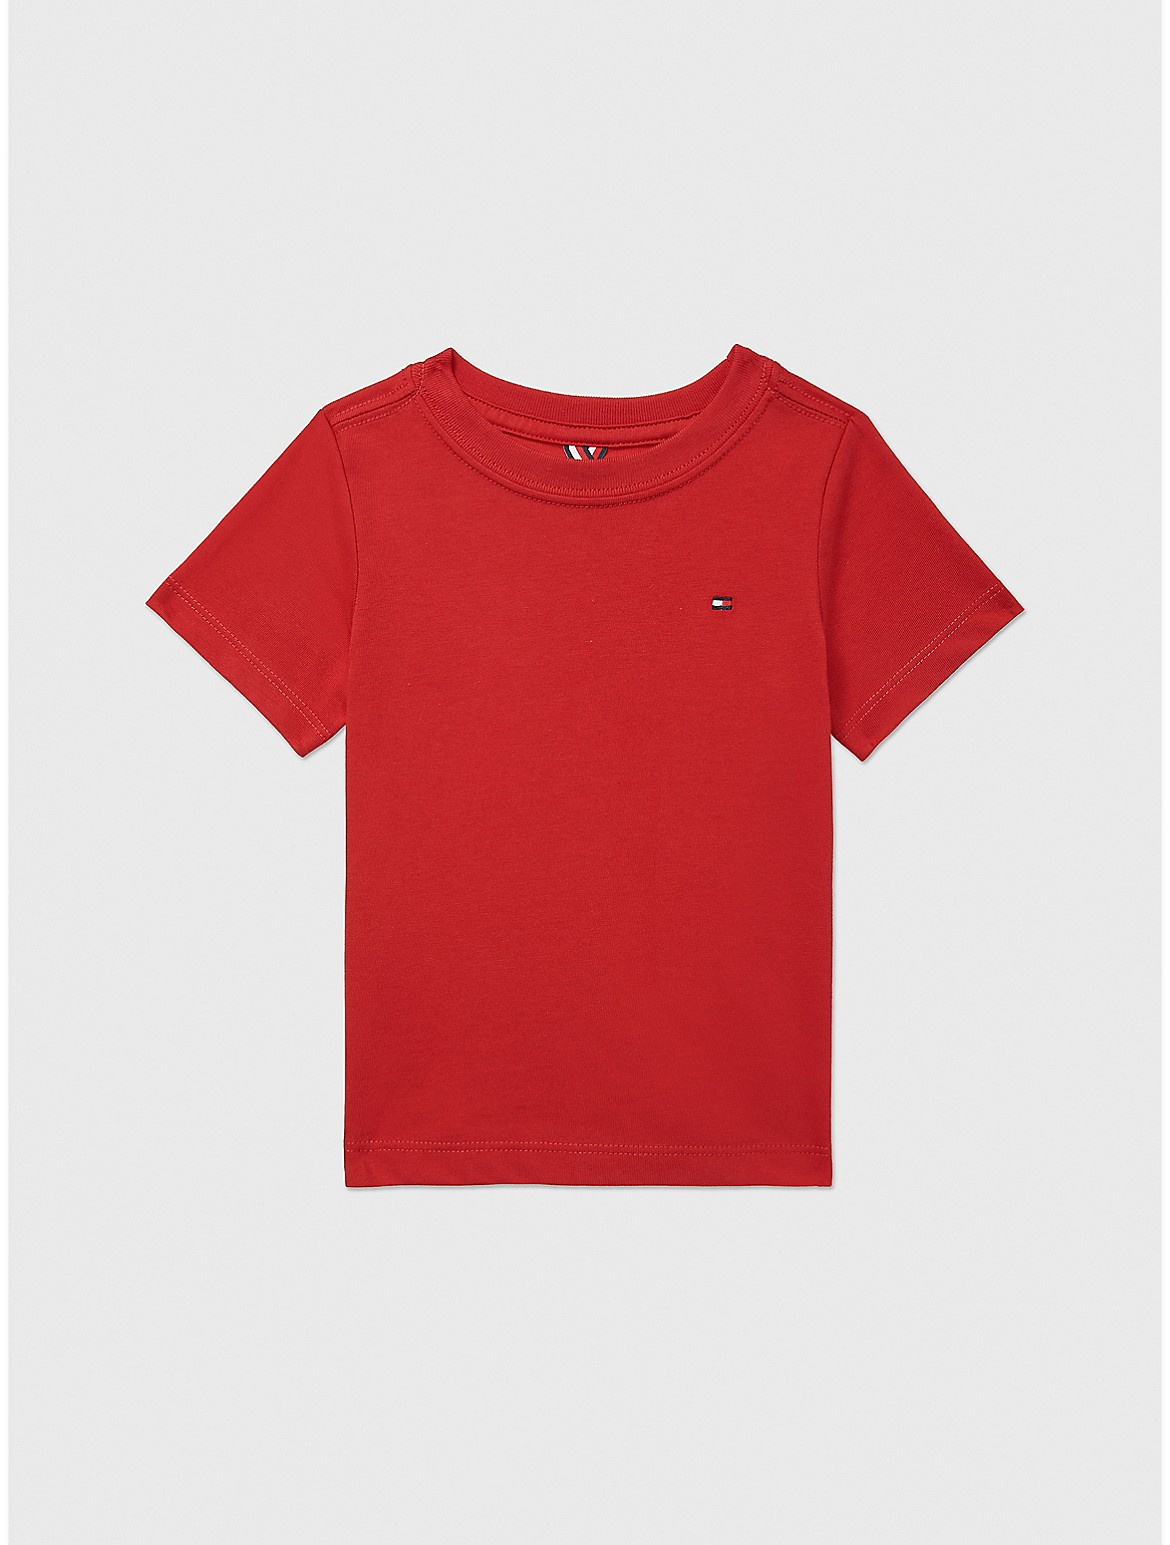 Tommy Hilfiger Boys' Babies' Solid T-Shirt - Red - 18M